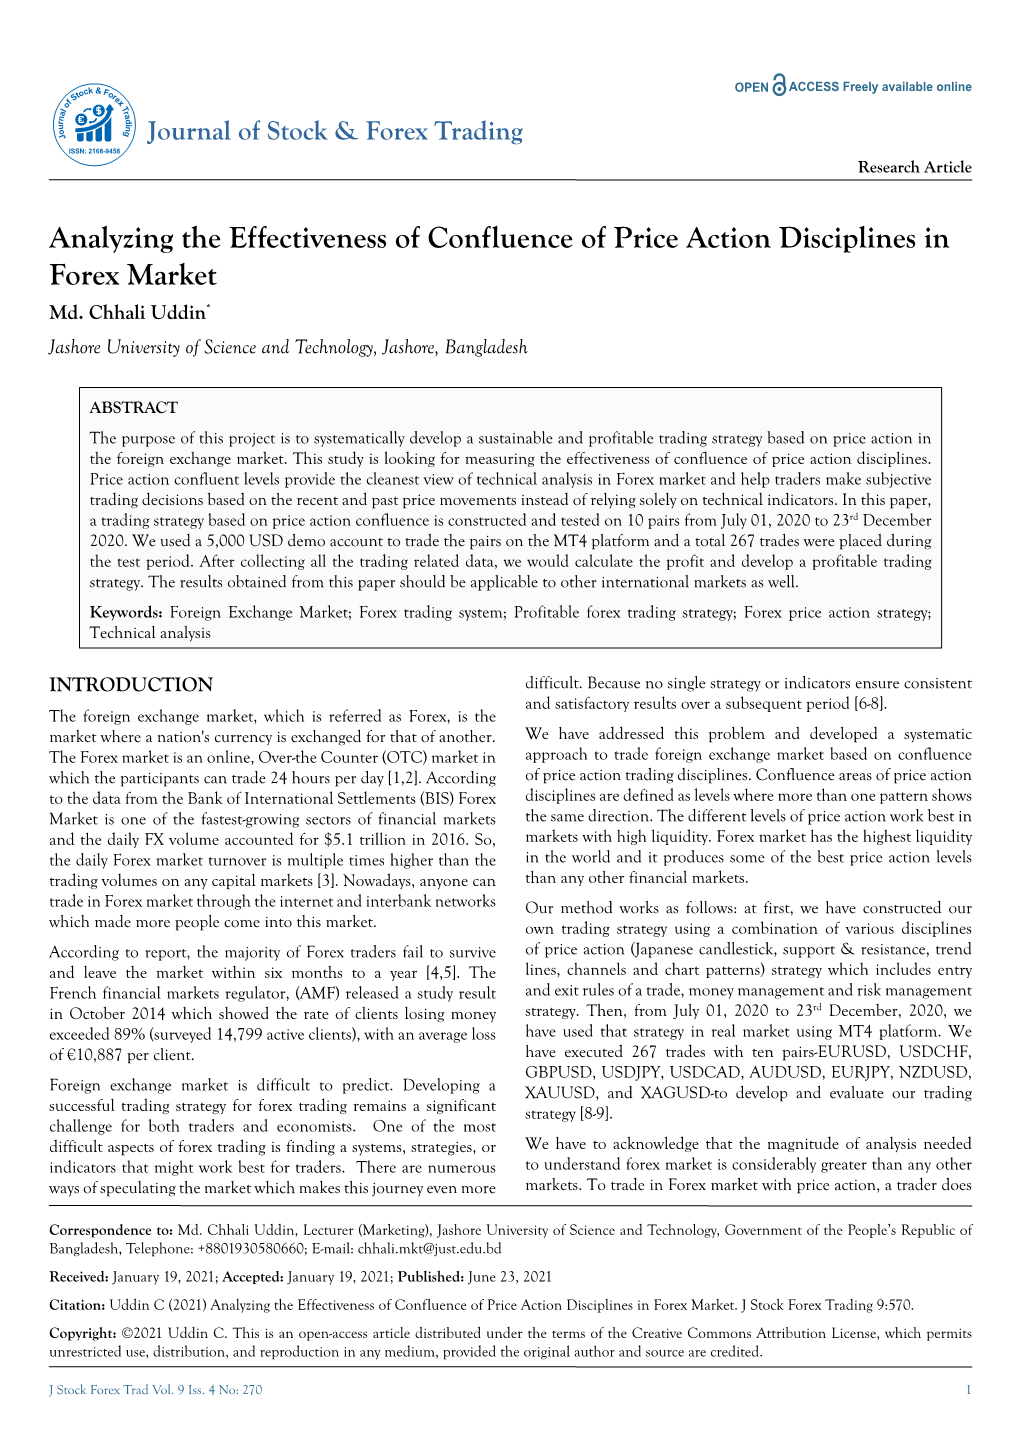 Analyzing the Effectiveness of Confluence of Price Action Disciplines in Forex Market Md